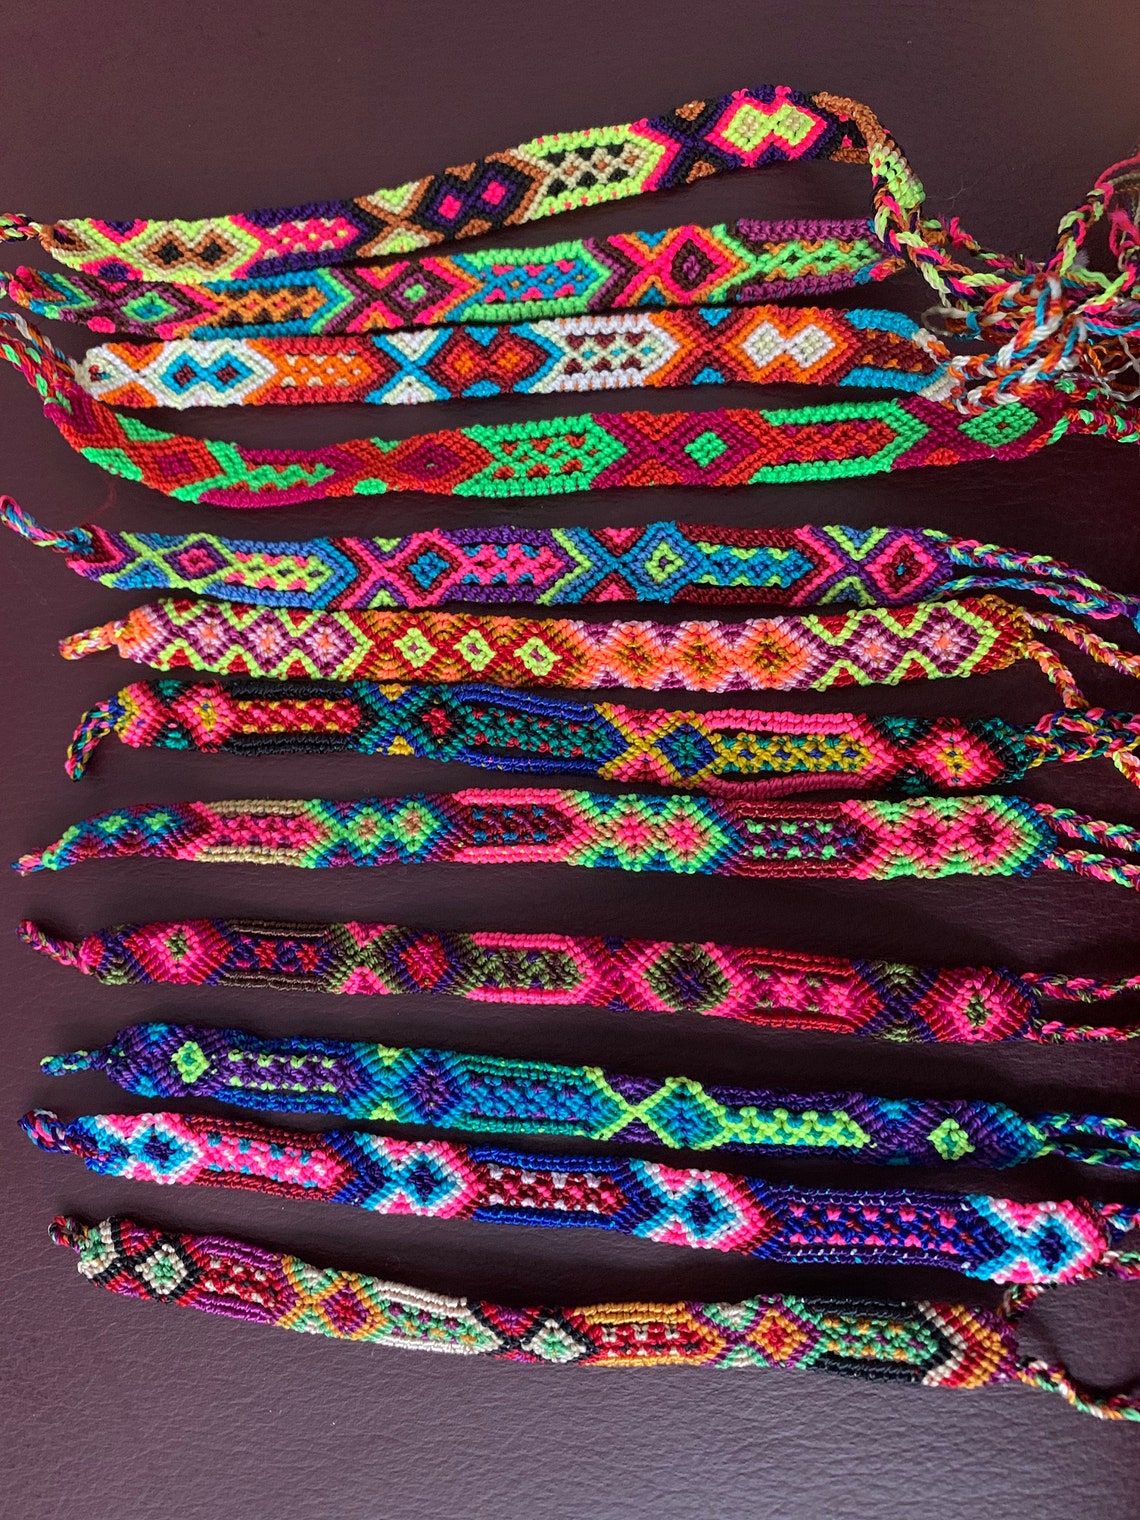 Friendship Bracelets Handmade Lucky Handwoven Mexican Colorful | Etsy